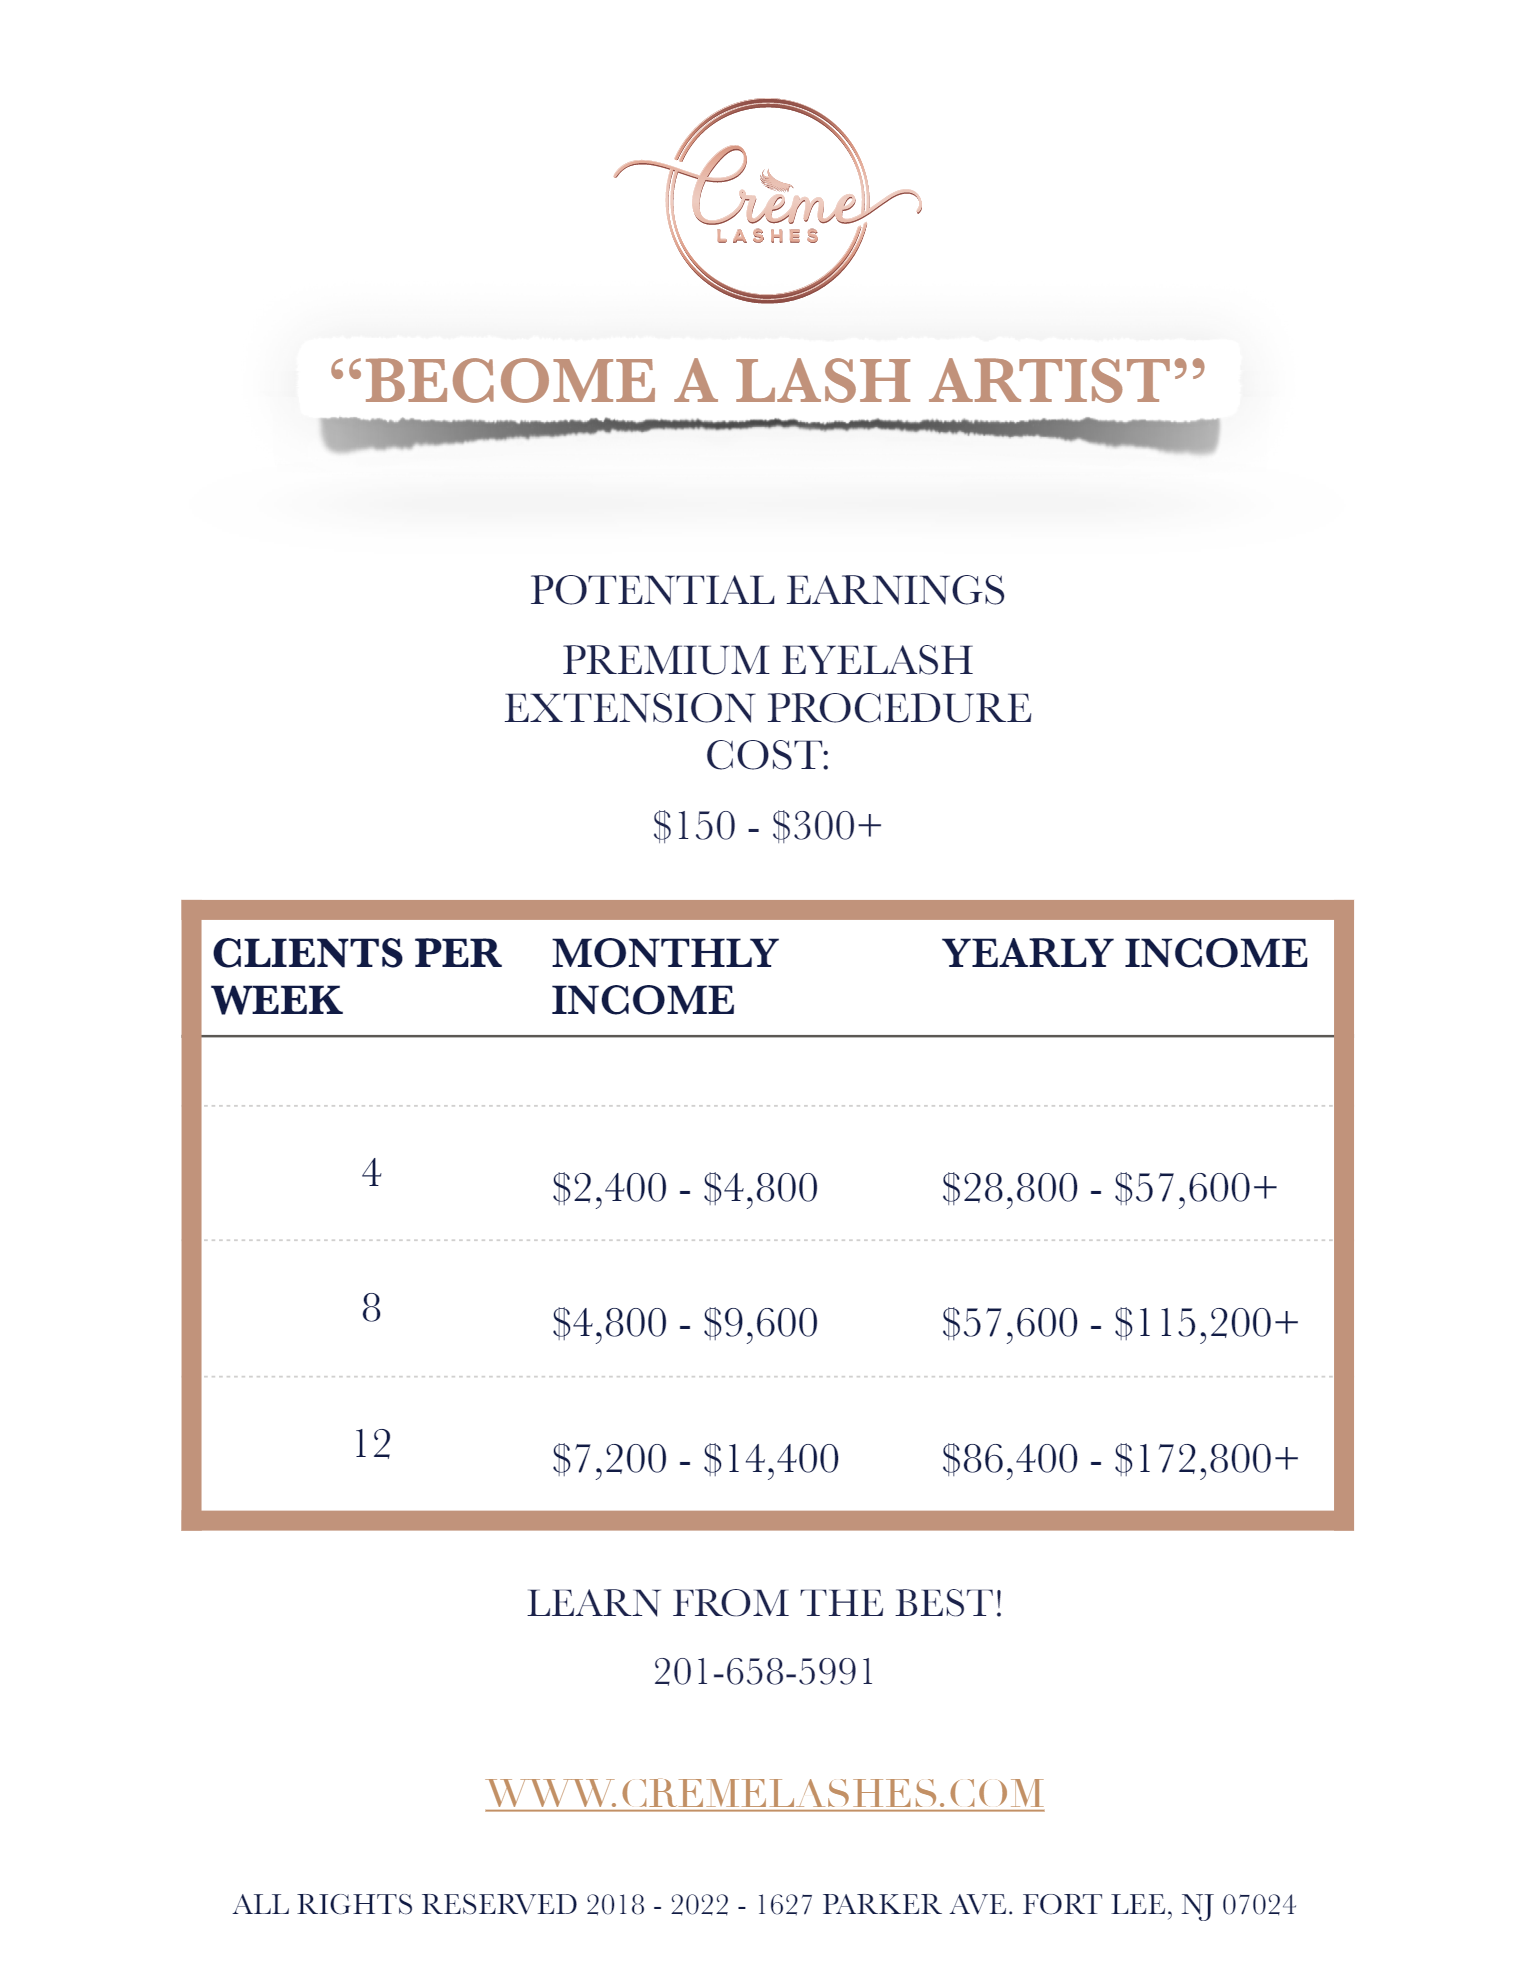 Creme Lashes - Potential Earnings